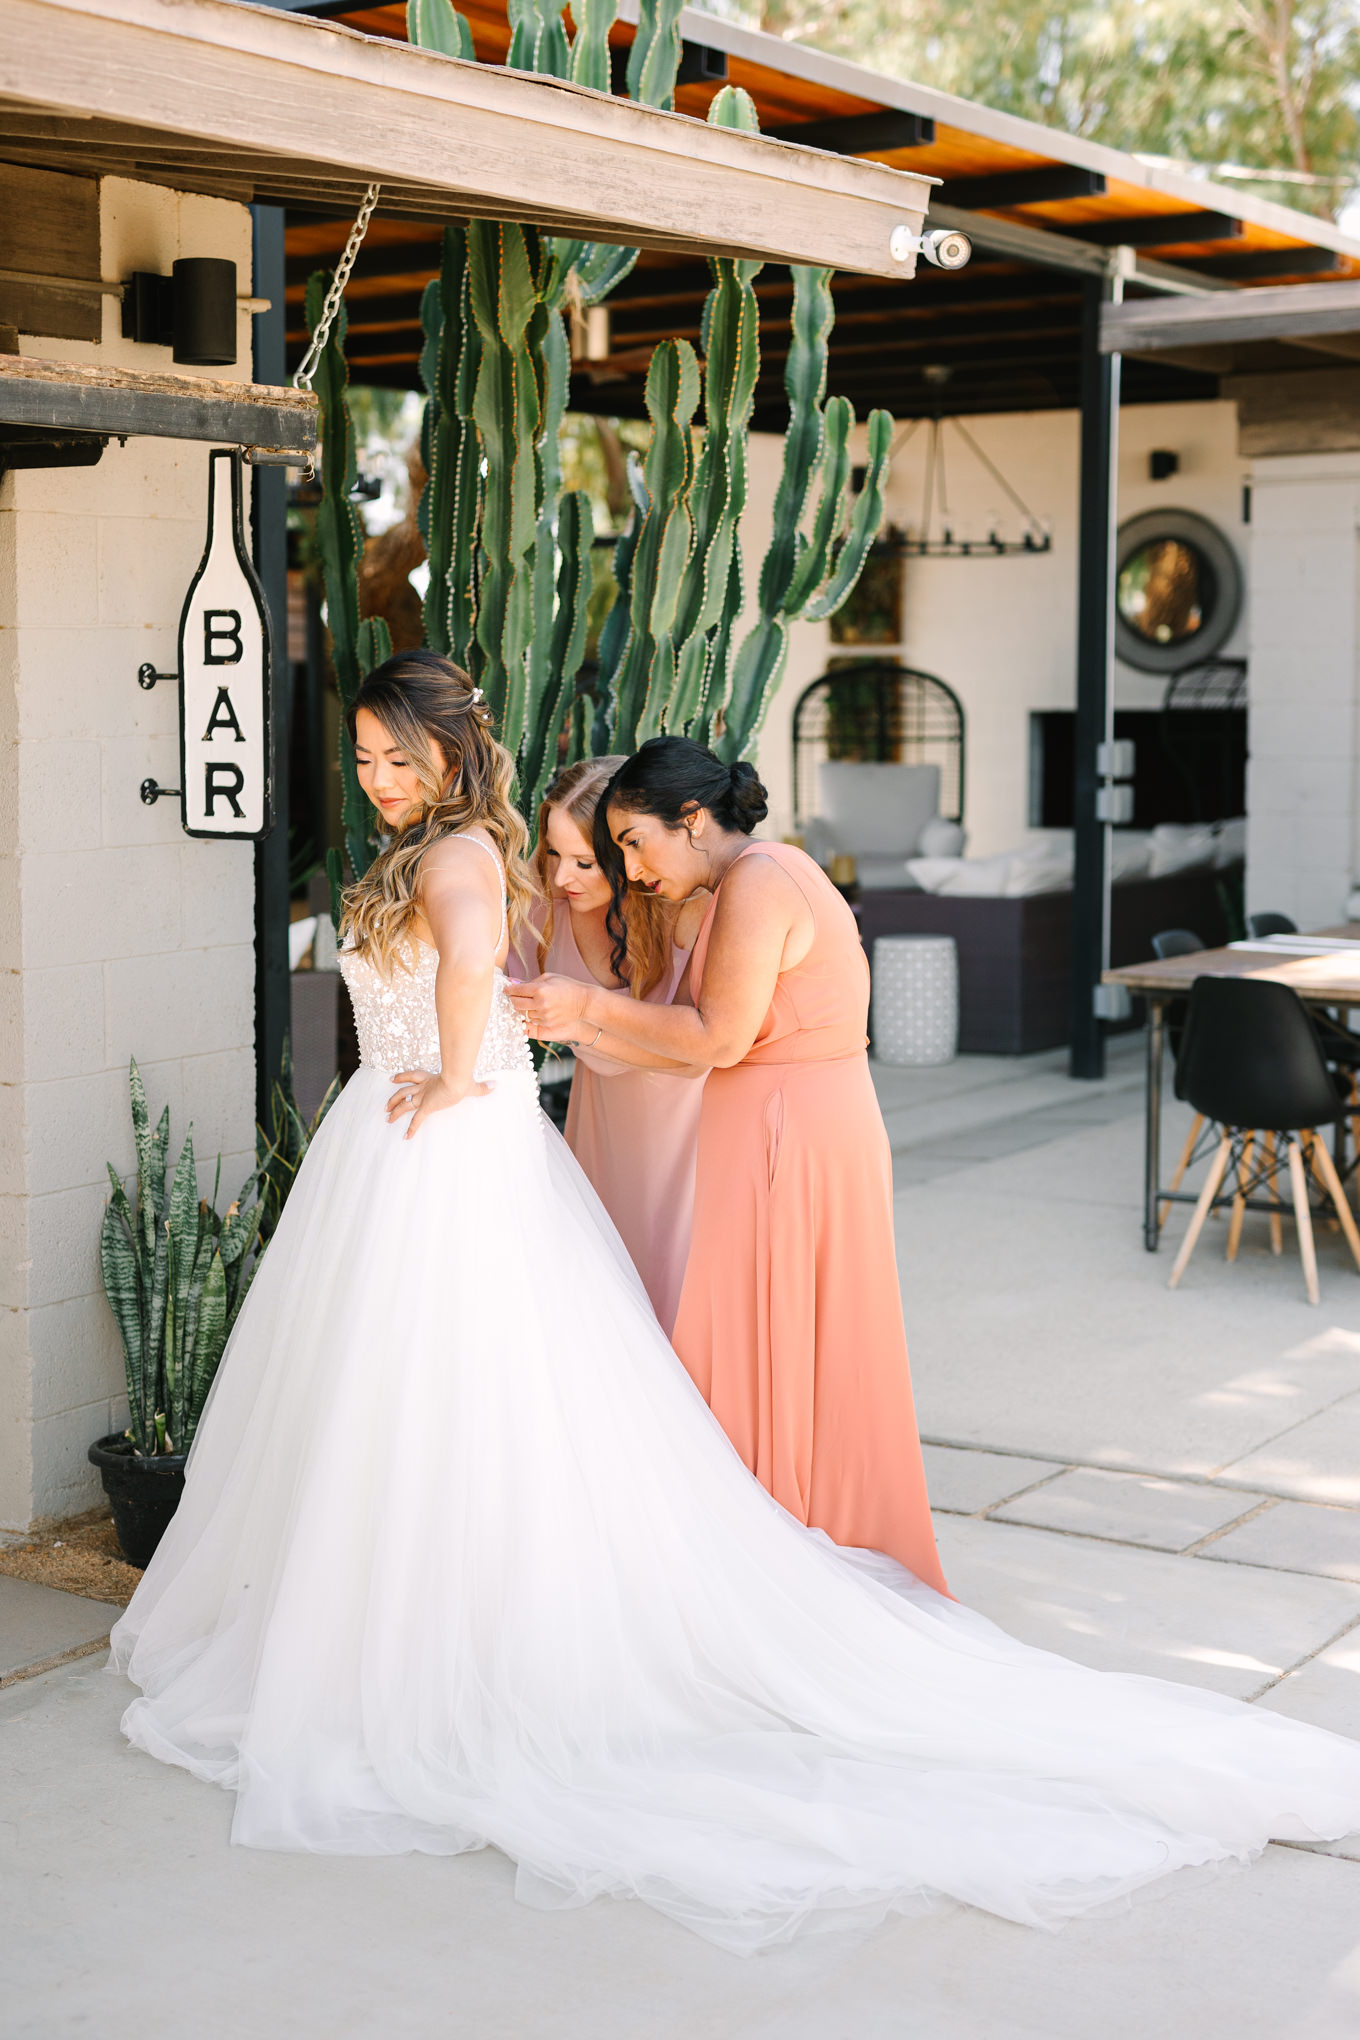 Bride getting dress on | Pink and orange Lautner Compound wedding | Colorful Palm Springs wedding photography | #palmspringsphotographer #palmspringswedding #lautnercompound #southerncaliforniawedding  Source: Mary Costa Photography | Los Angeles